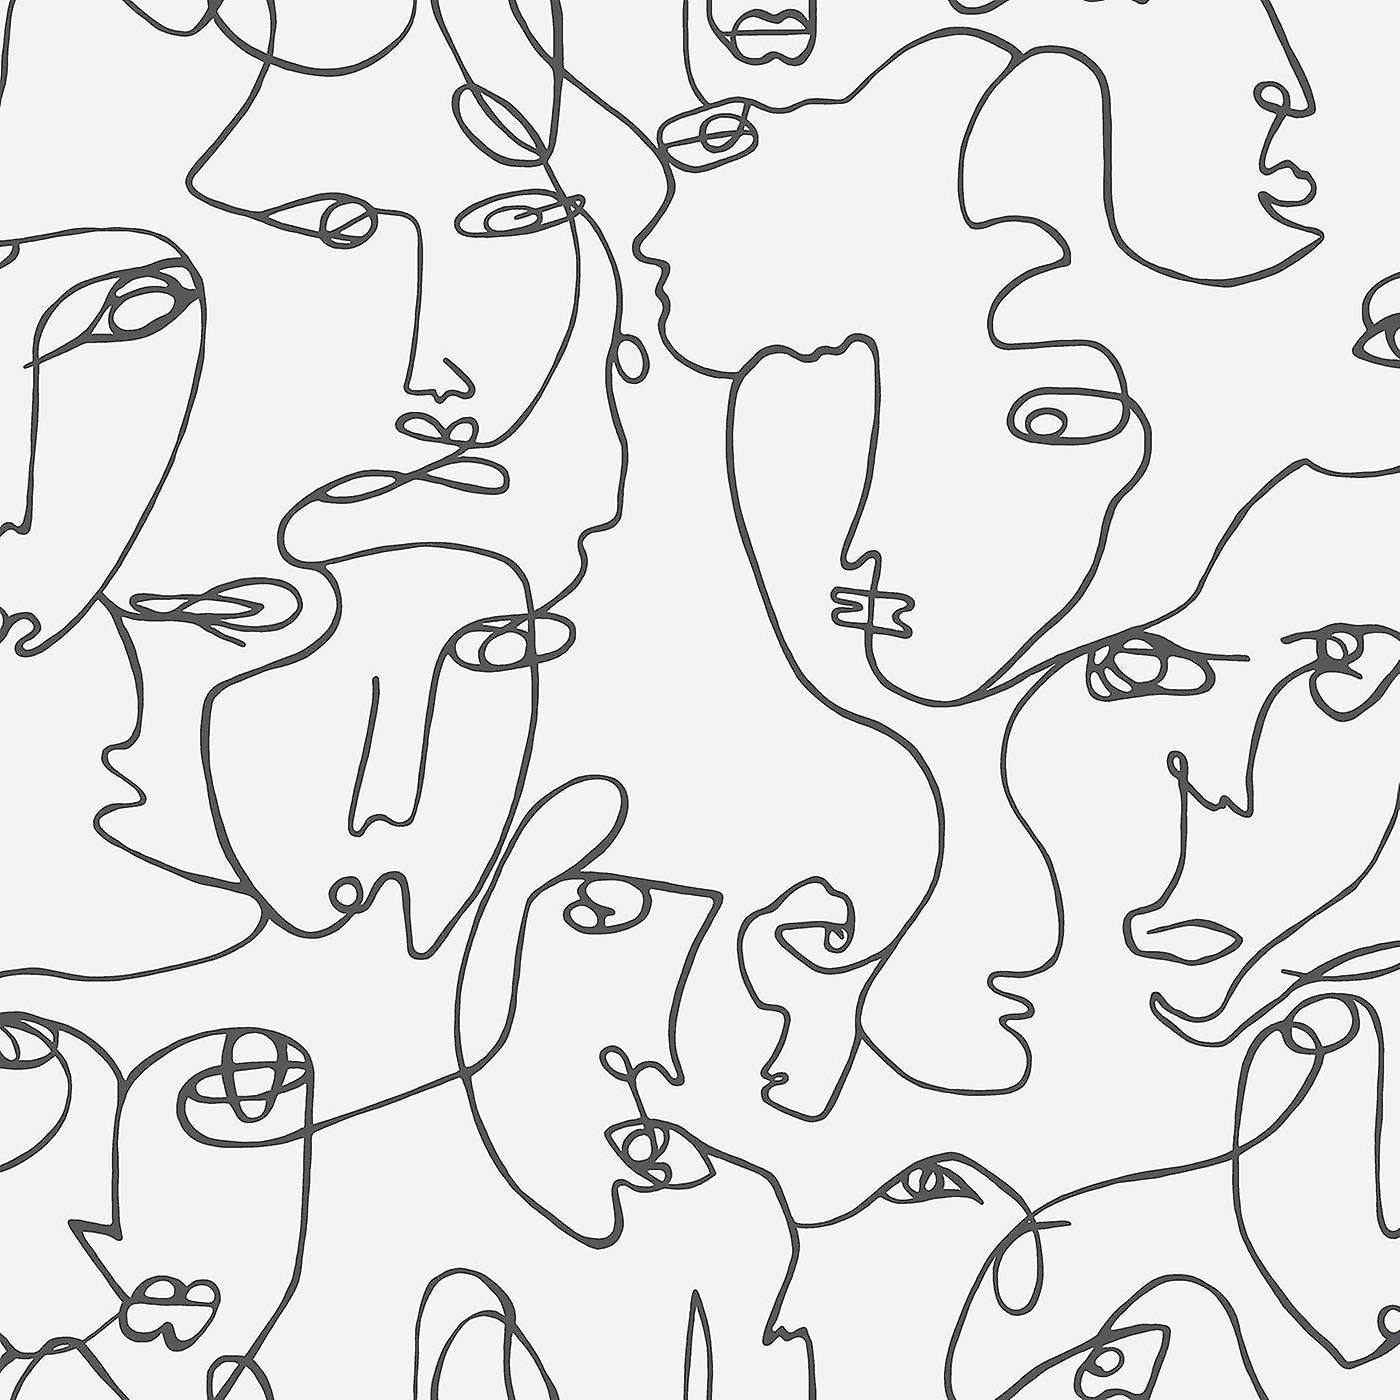 Abstract Faces Black White Wallpaper